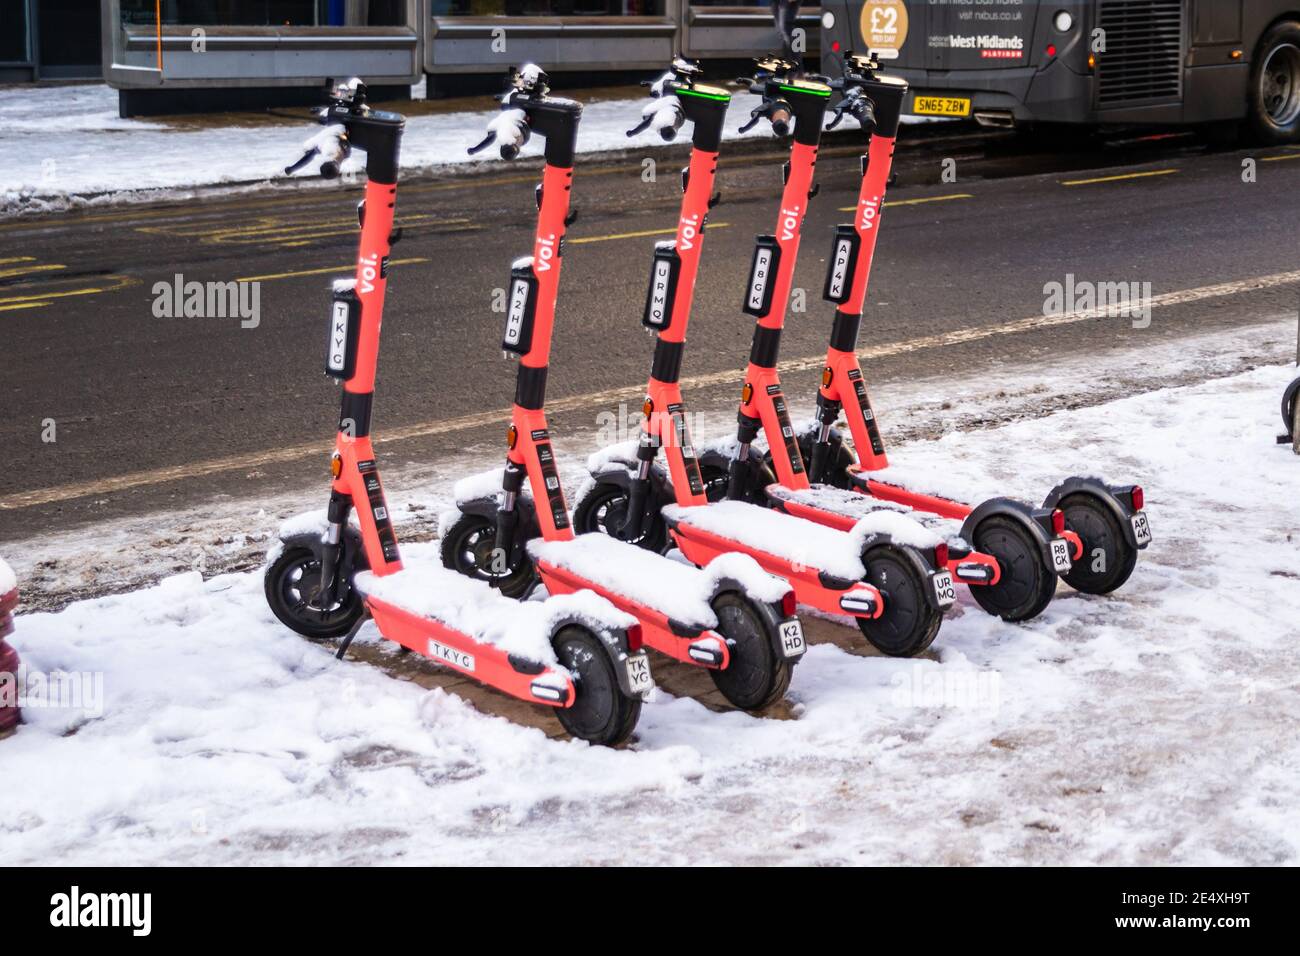 Birmingham, West Midlands, UK. 25th January 2021 - Voi electric scooters lined up in the snow on Bull Street near to The Square Peg pub. Credit: Ryan Underwood / Alamy Live News Stock Photo